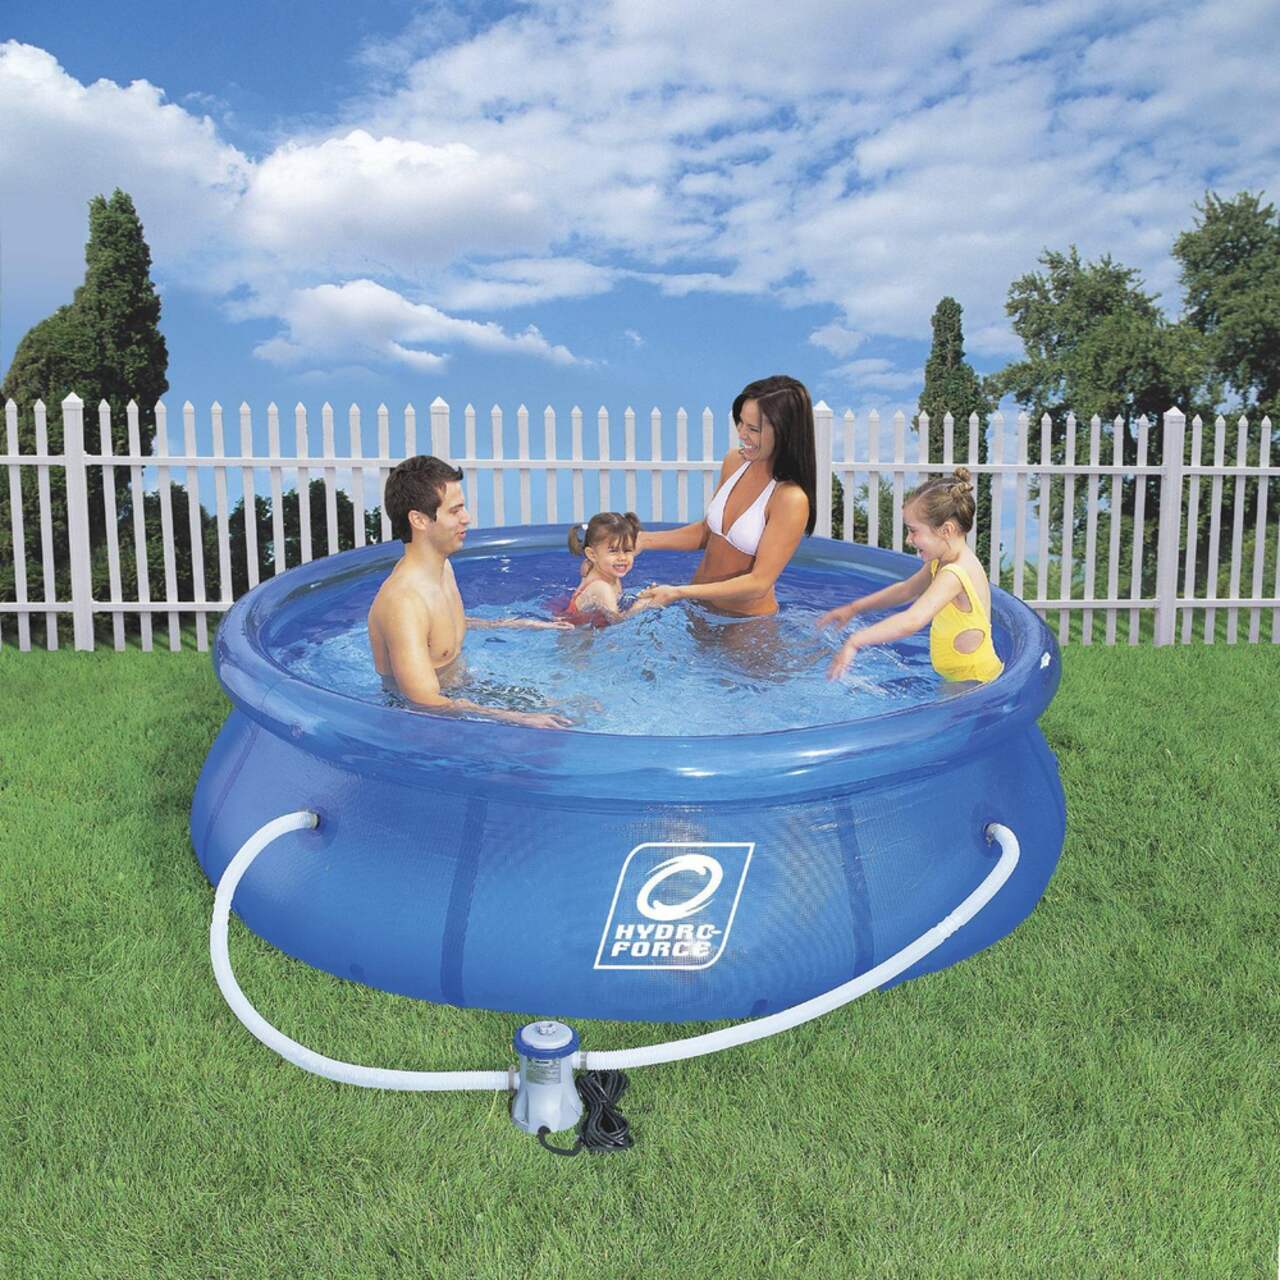 Hydro-Force Simple Set Soft-Sided Pool, 8-ft x 8-ft x 26-in